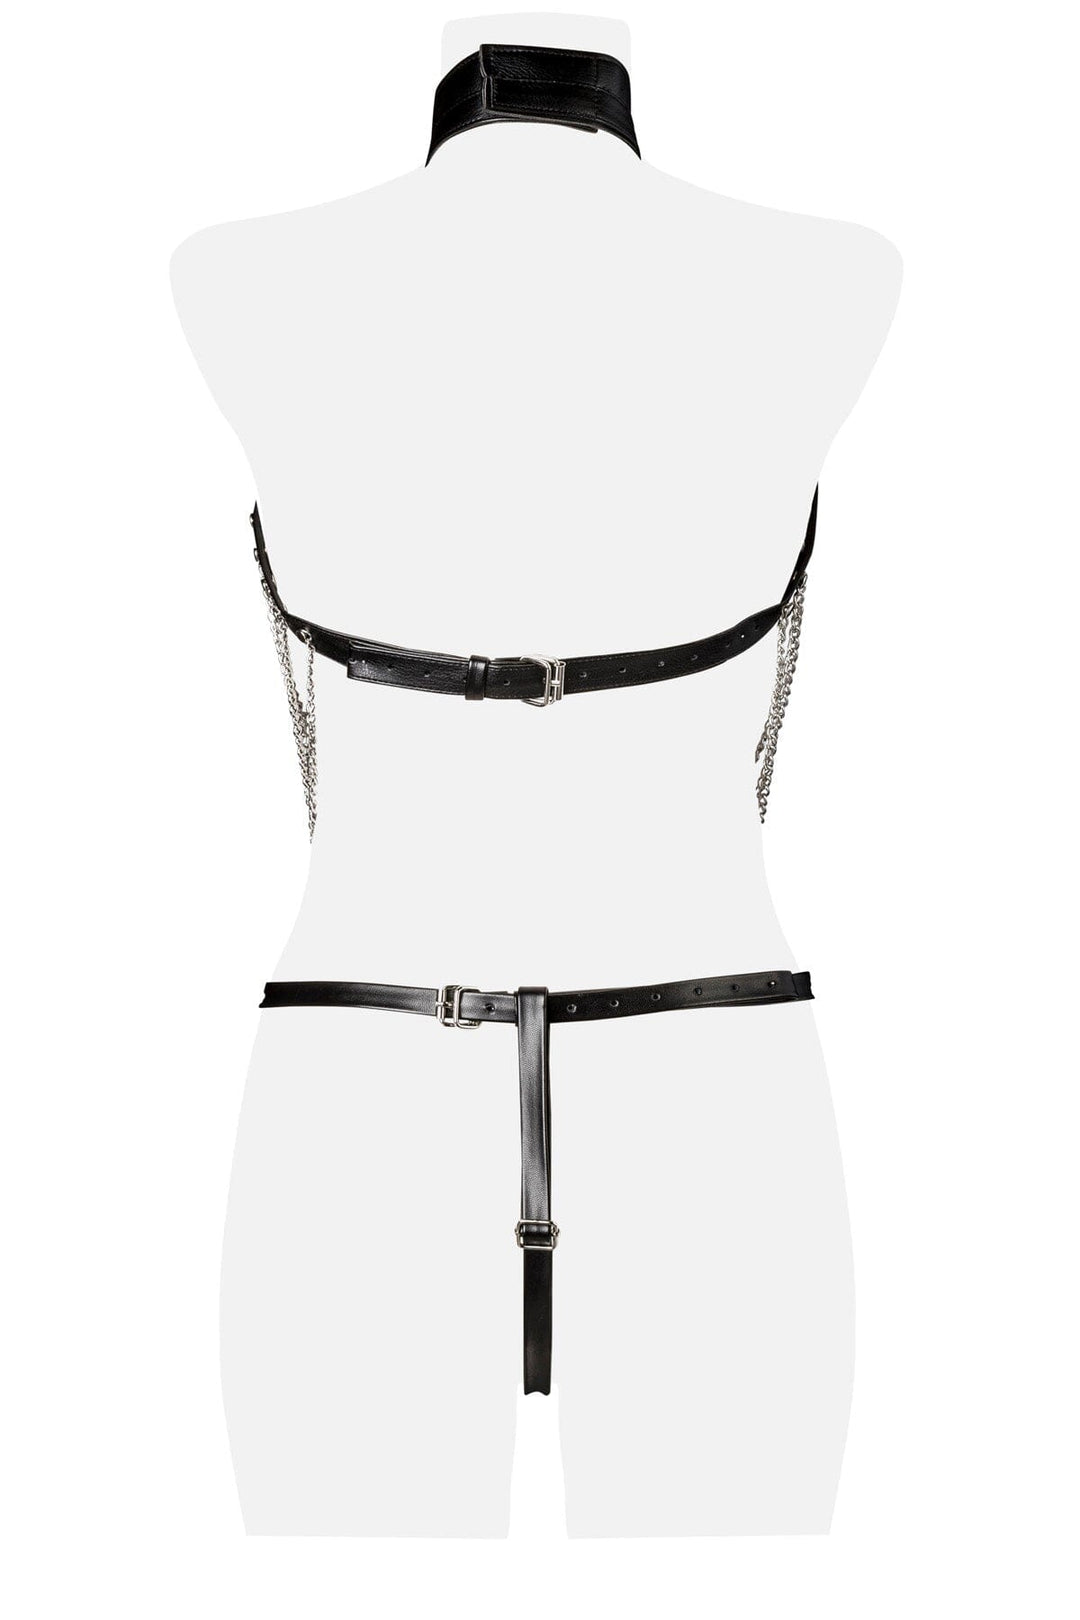 3 Piece Choker Bra and Hanging Chain Set-Body Harness-Grey Velvet-SEXYSHOES.COM